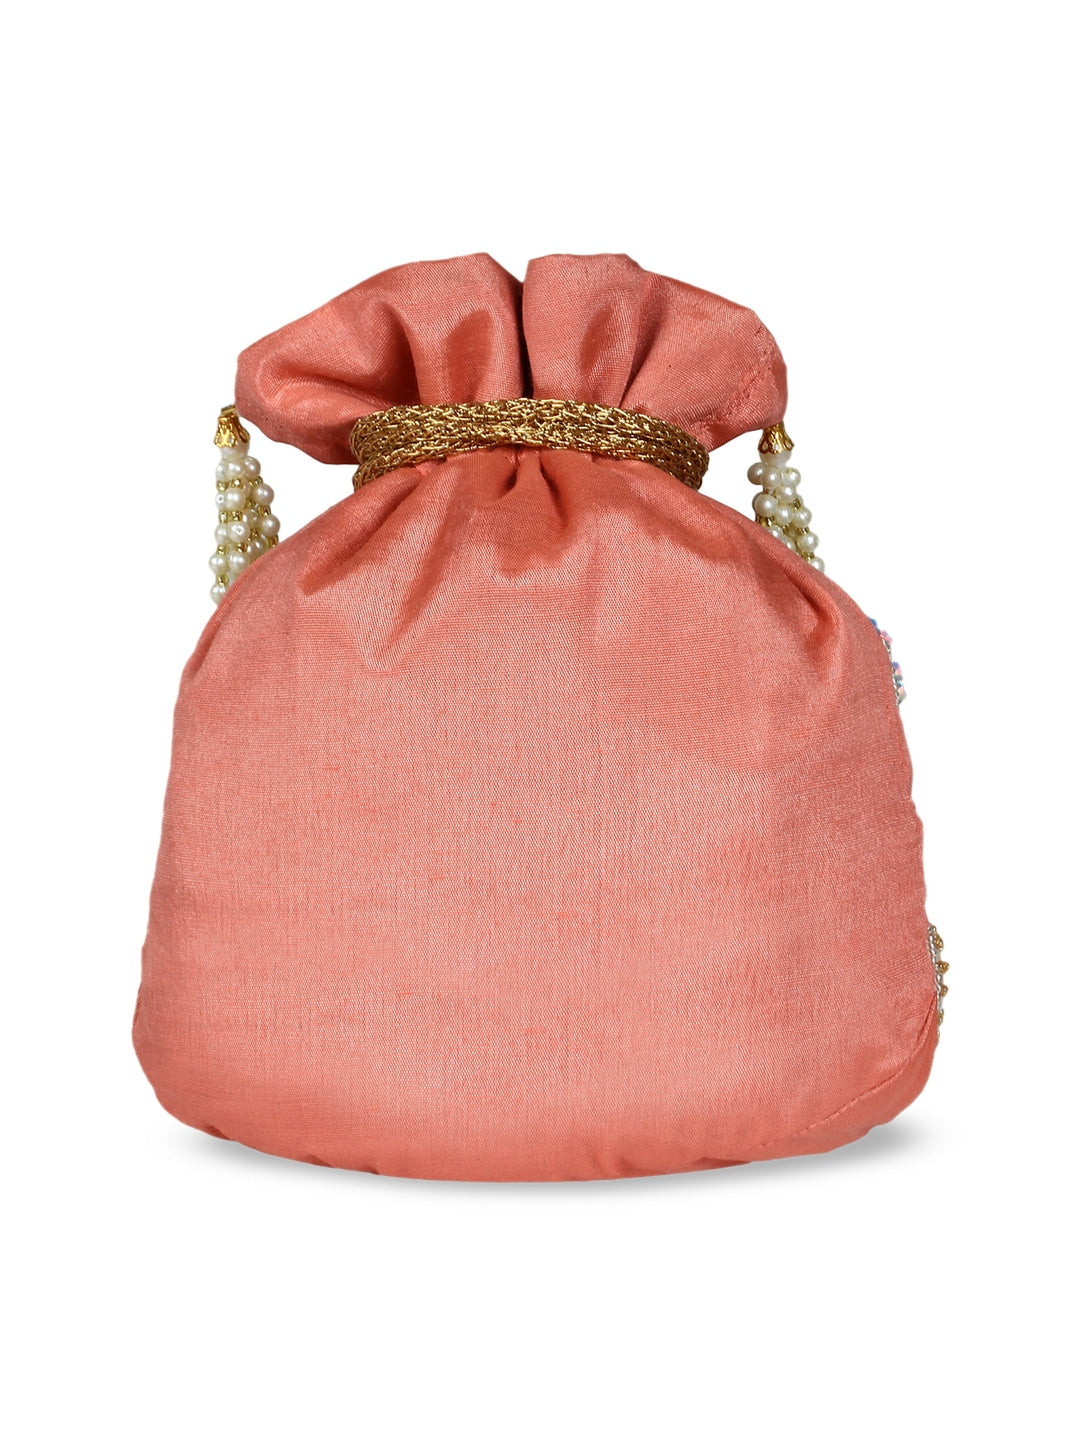 Peach-Coloured & Gold-Toned Embellished Clutch